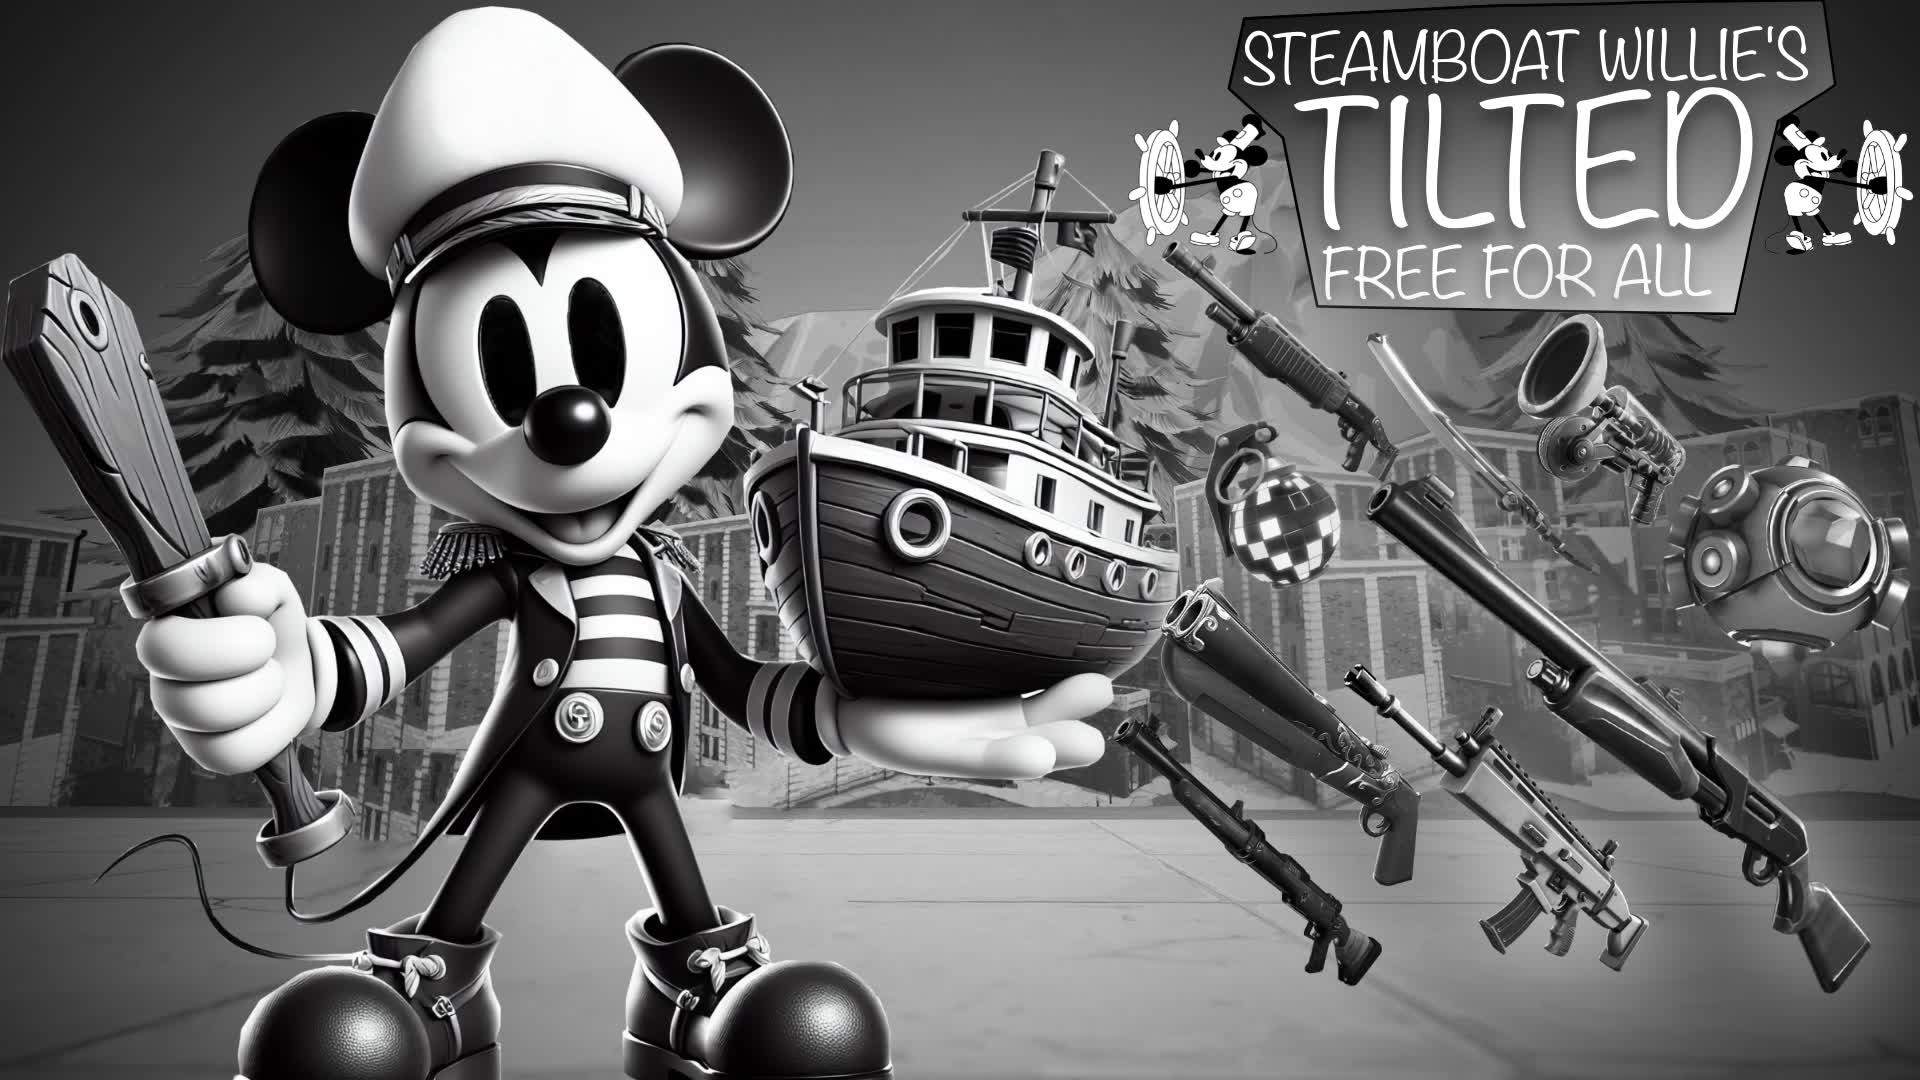 🐭STEAMBOAT WILLIE'S TILTED FREE FOR ALL